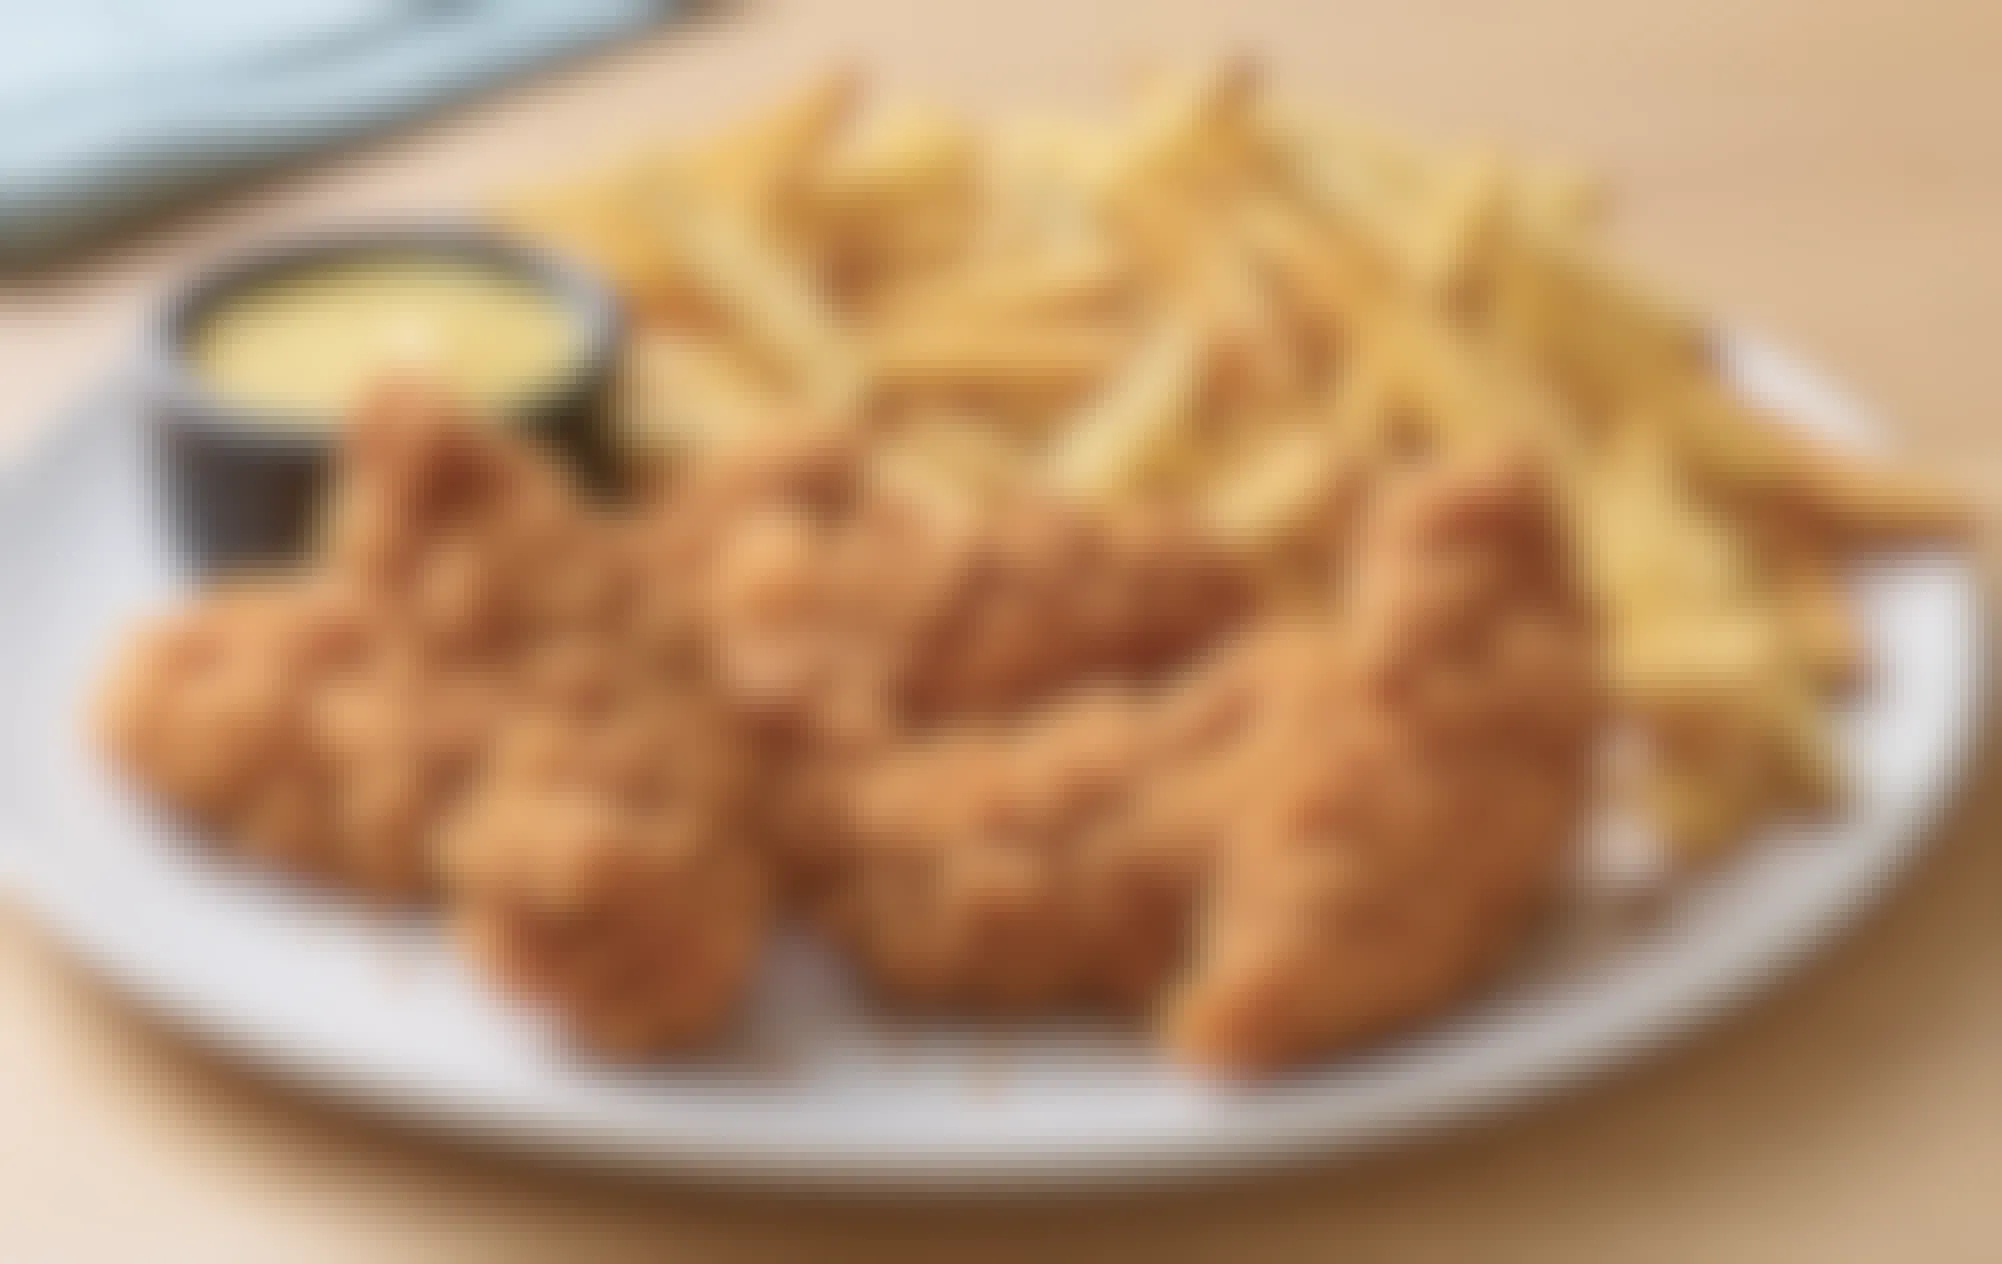 The official photo of the Applebee's chicken tenders plate, the cheapest thing you can buy to get a kids eat free meal.